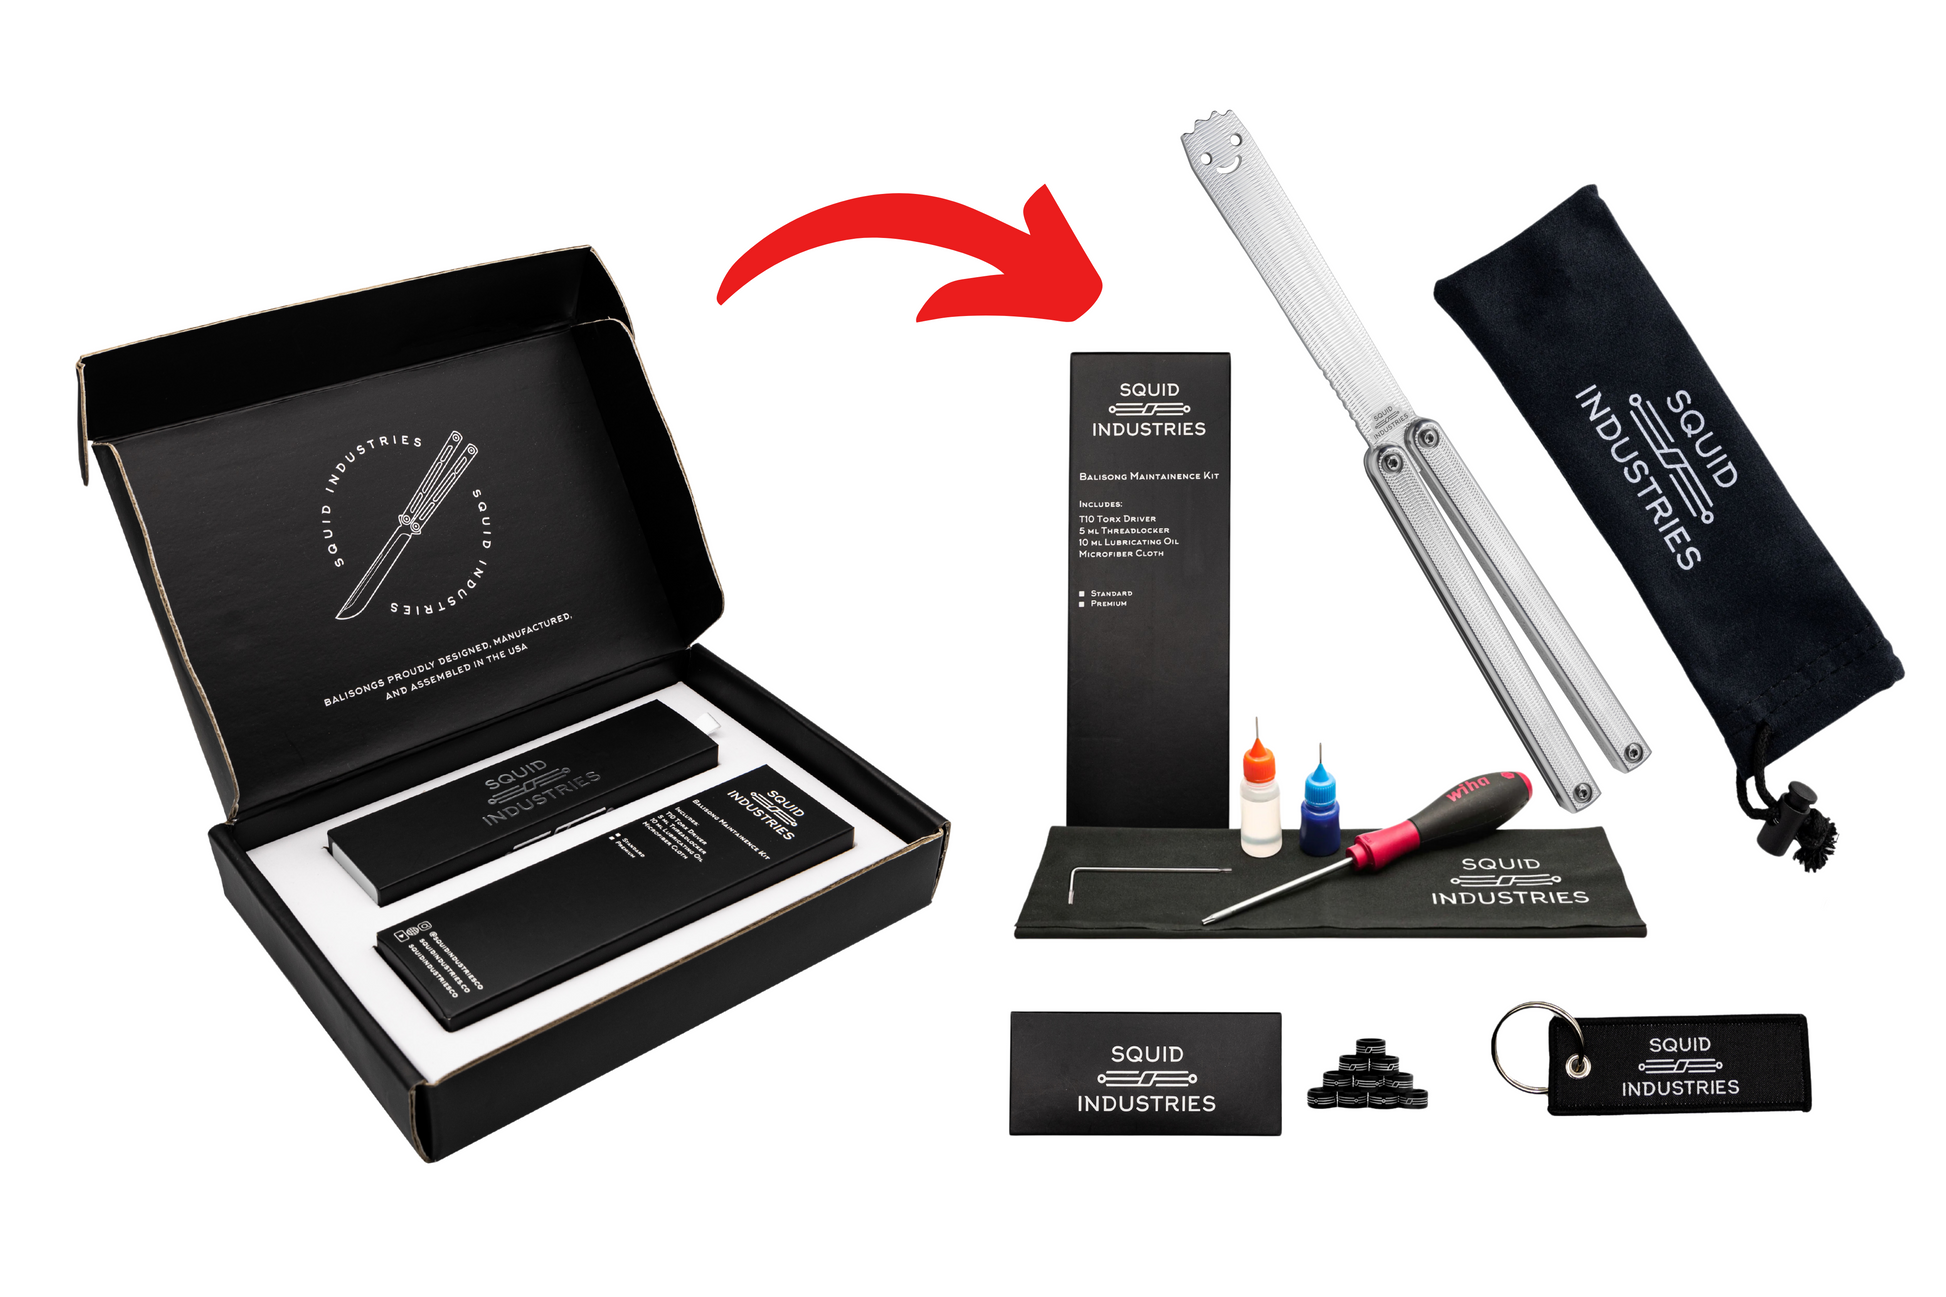 Squid Industries Beginner Holiday Bundle Box includes Squiddy-Al balisong trainer, Squid Industries Maintenance Kit, Flight Tag, Bit Handle Indicators, Microfiber pouch, and extra hardware